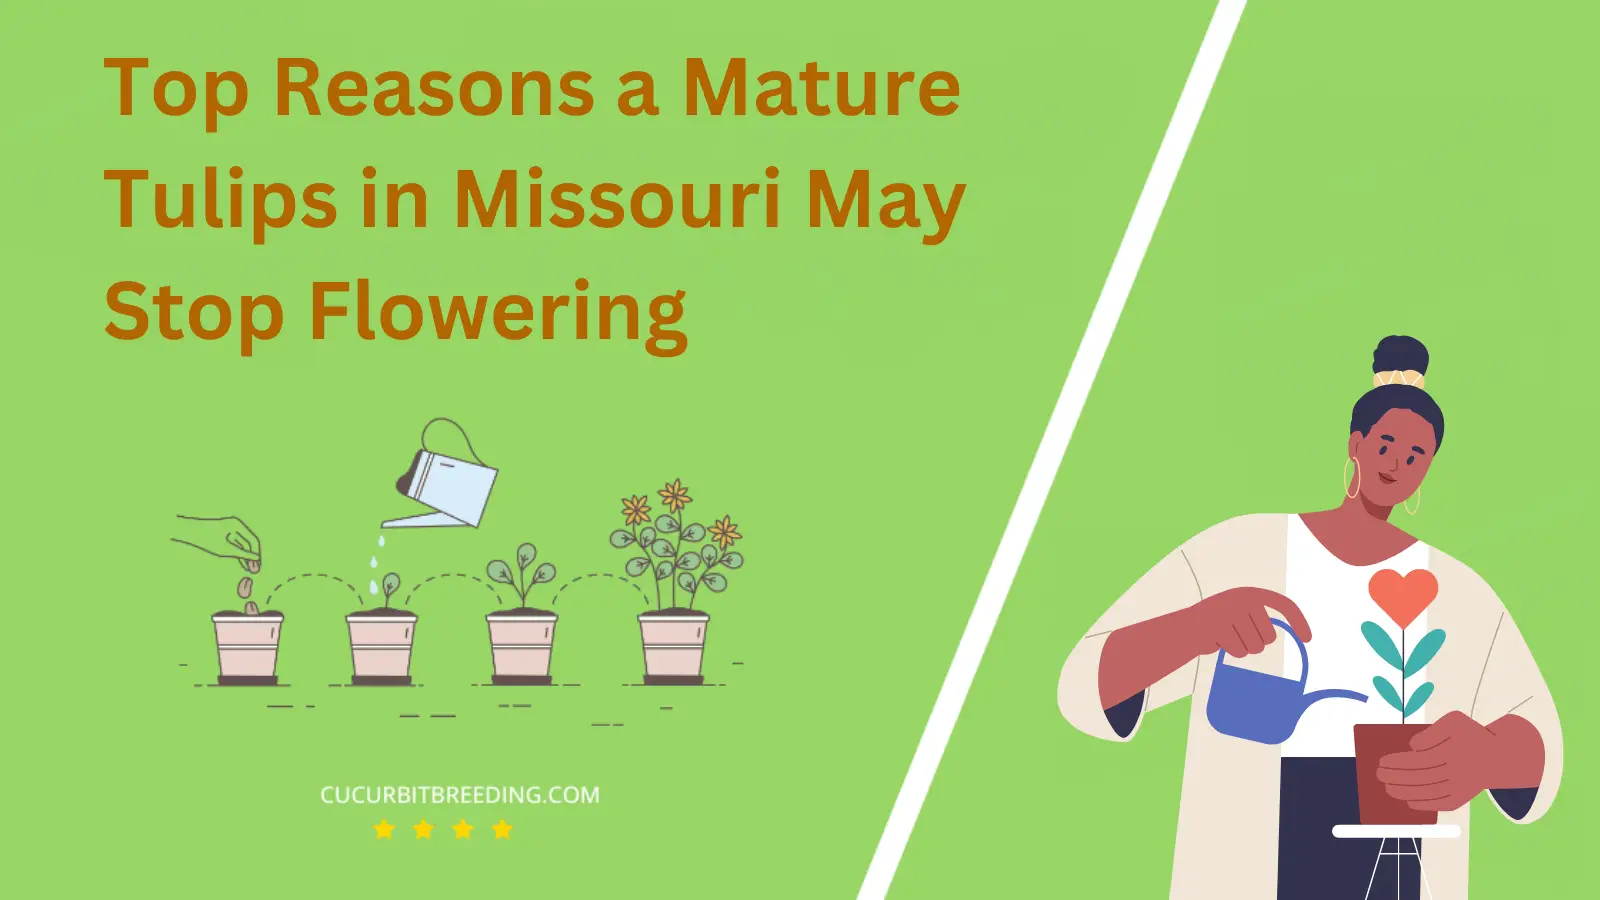 Top Reasons a Mature Tulips in Missouri May Stop Flowering